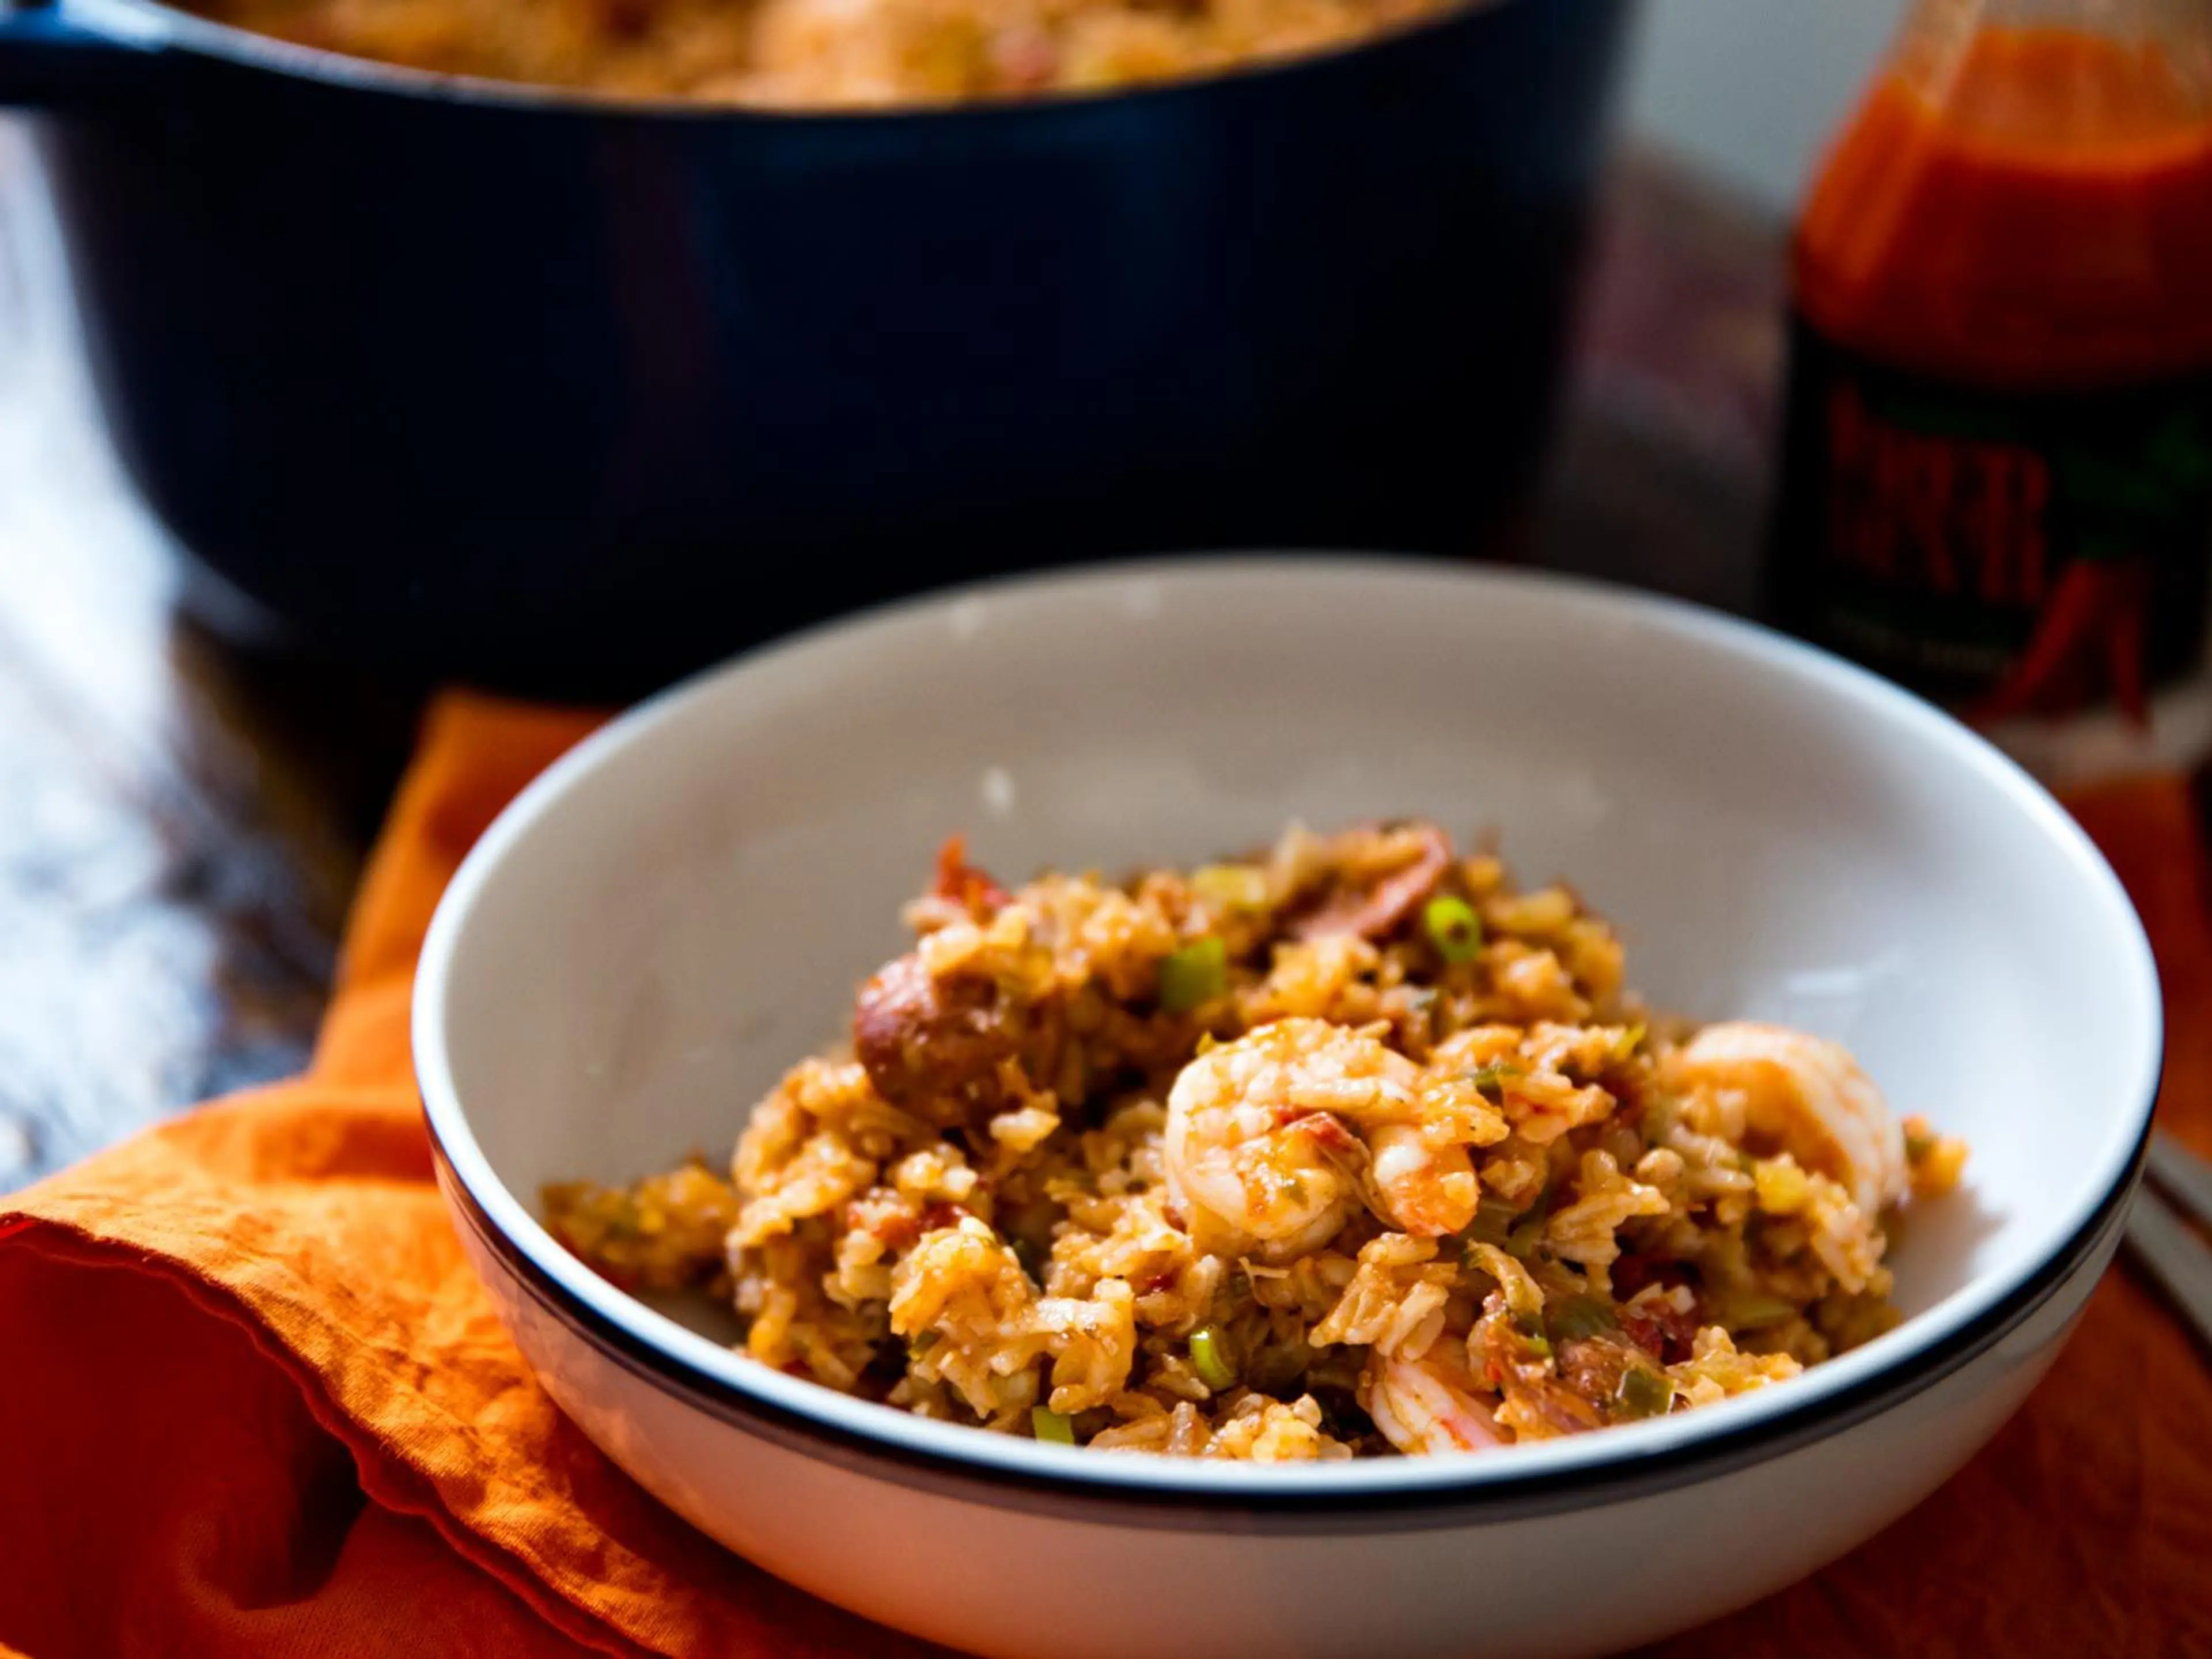 Creole-Style Red Jambalaya With Chicken, Sausage, and Shrimp